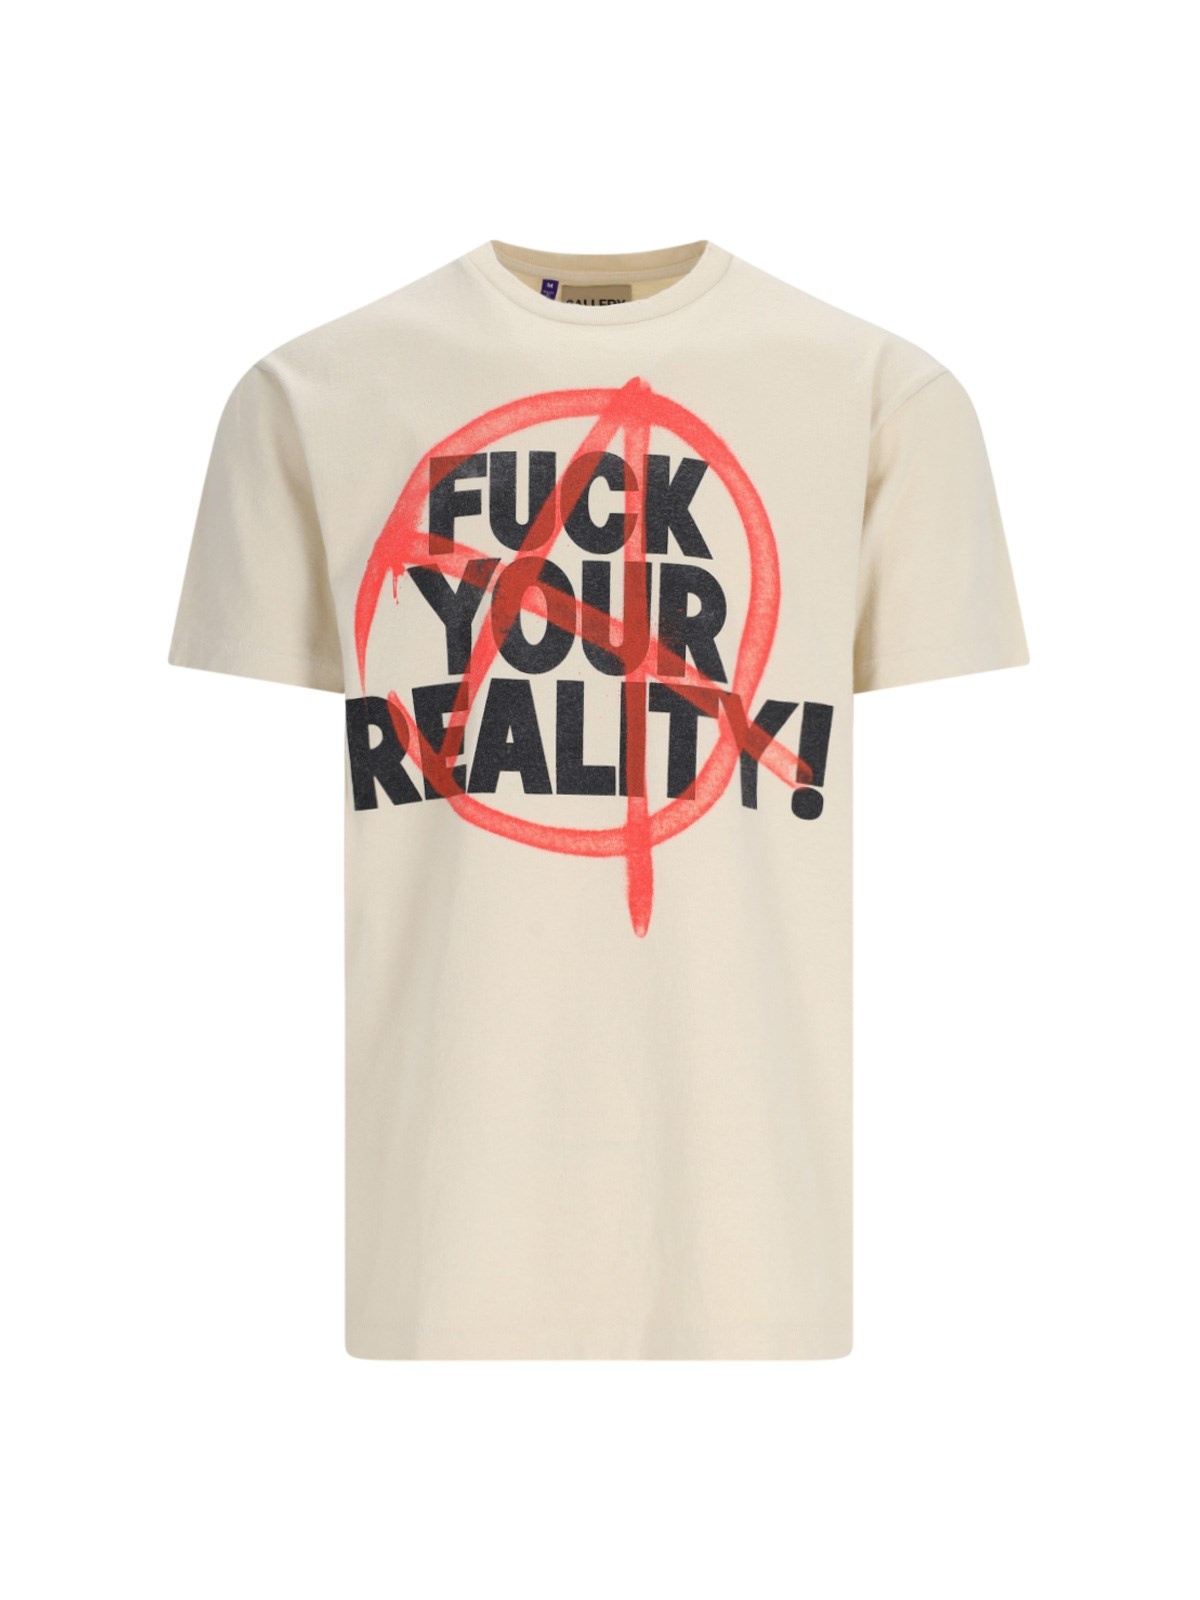 'FUCK YOUR REALITY' T-SHIRT - 1